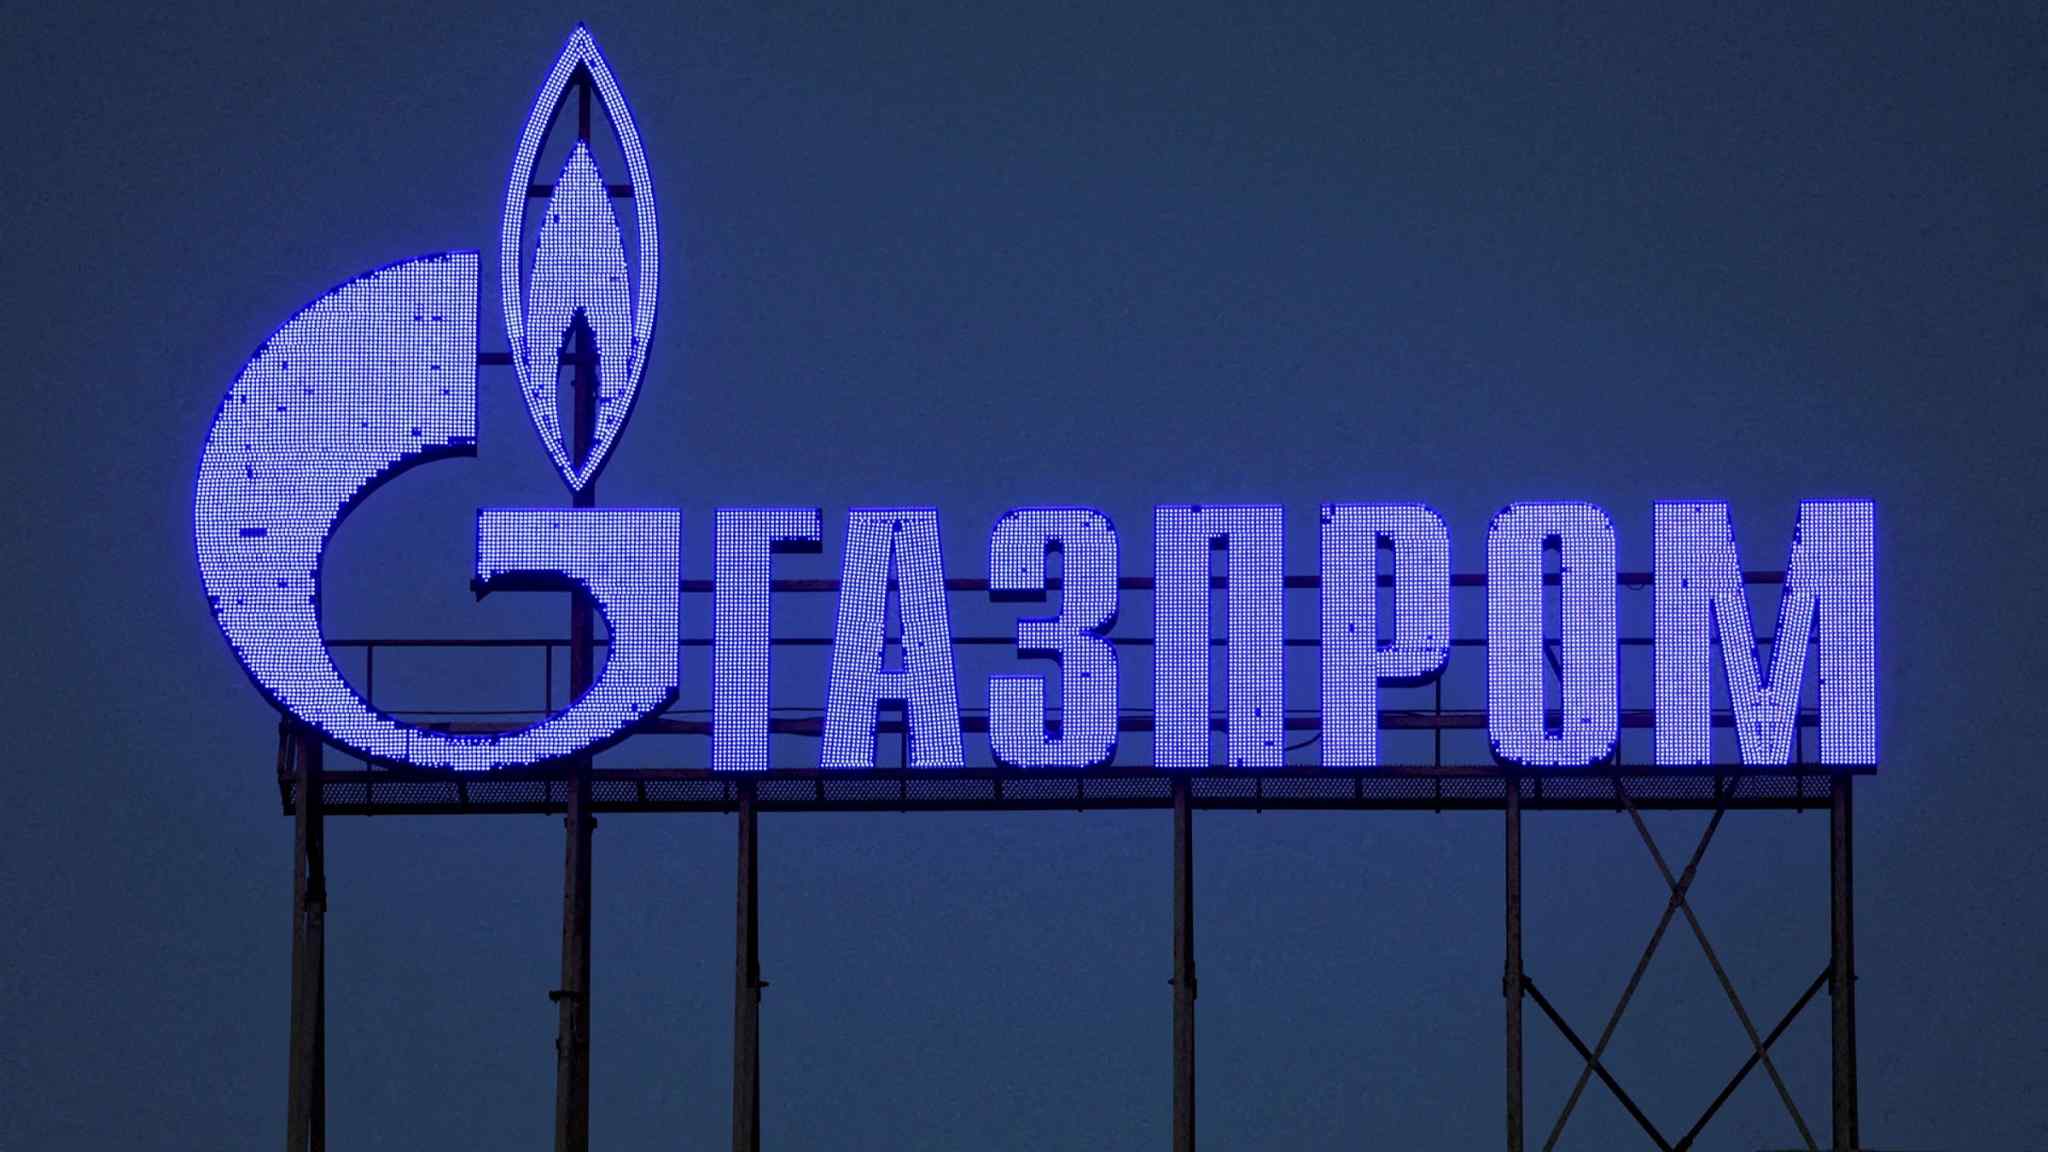 Live news updates: Gazprom shares fall 25% as dividend is blocked